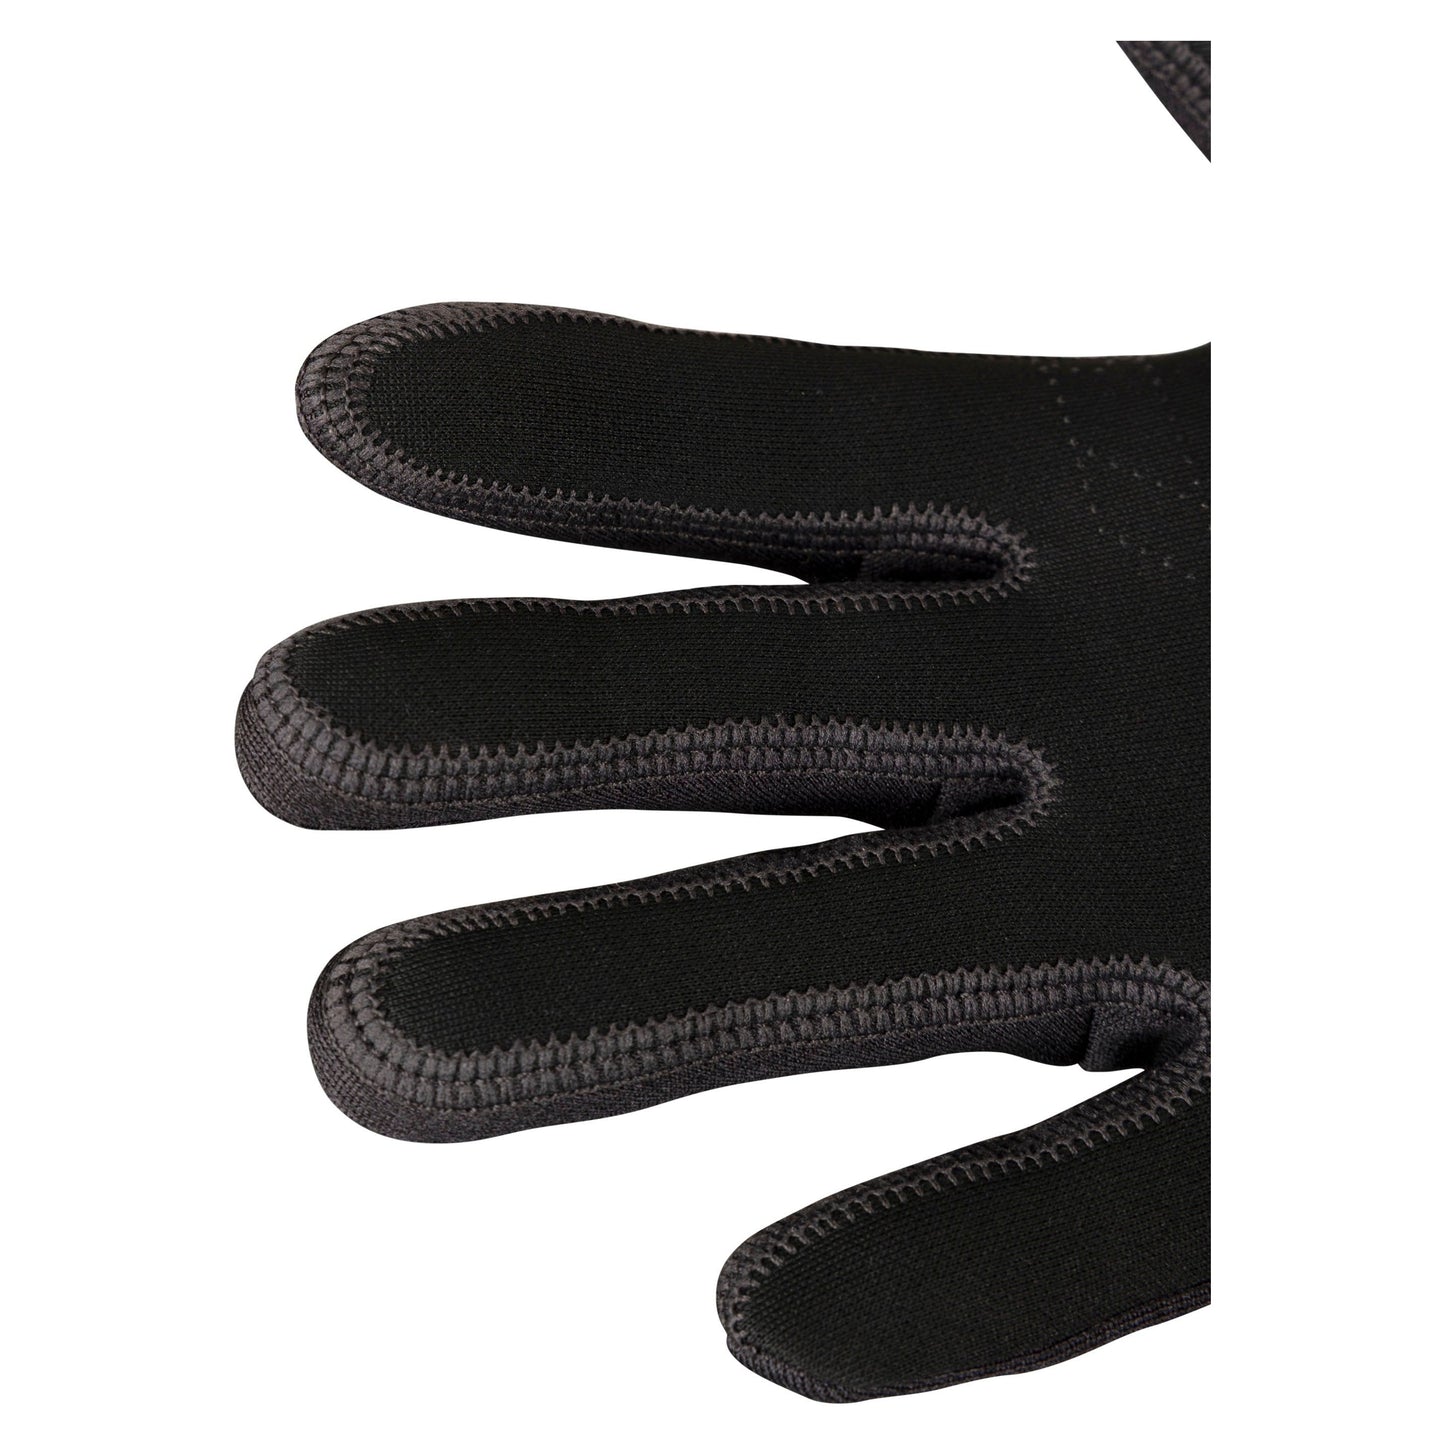 Atherton Kids Touch Screen Insulated Knitted Gloves in Carbon Marl